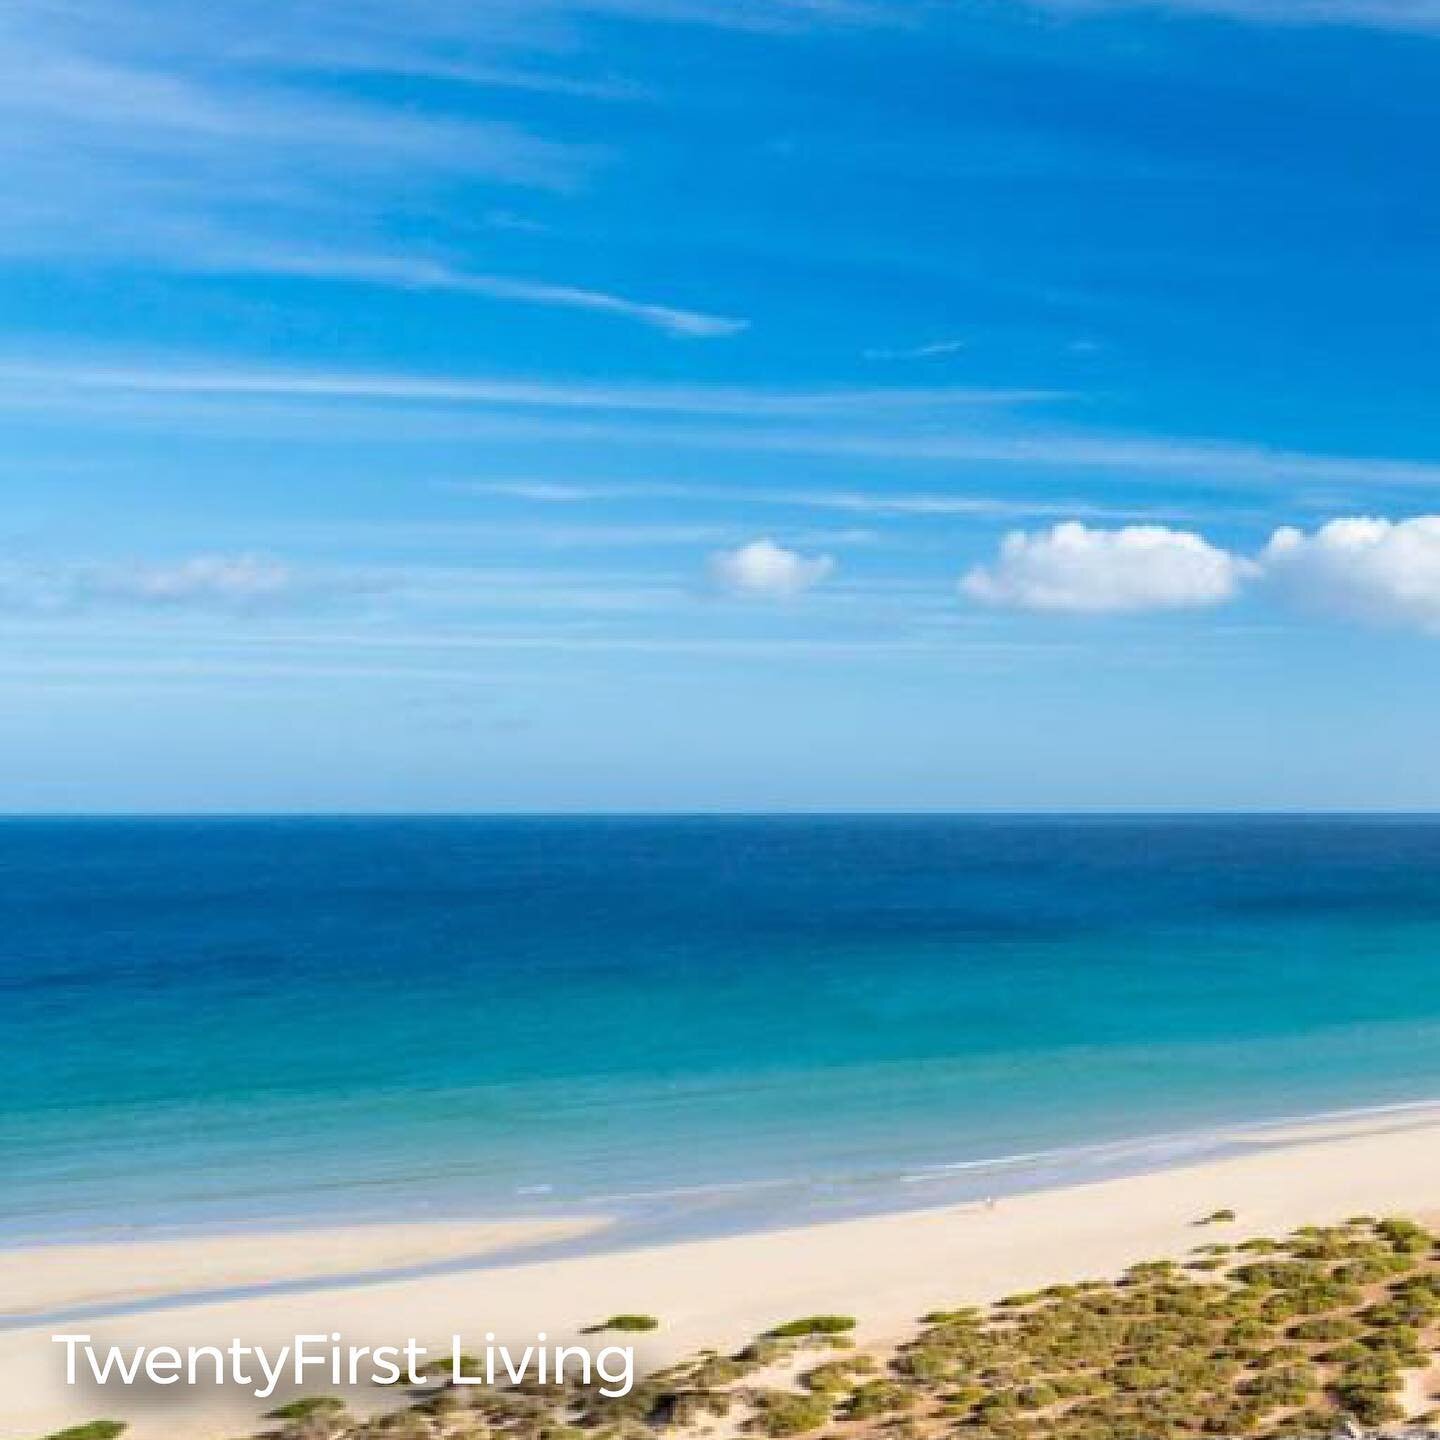 Wishing you sunshine and love during Easter time!
#easter #fuerteventura #stayhome